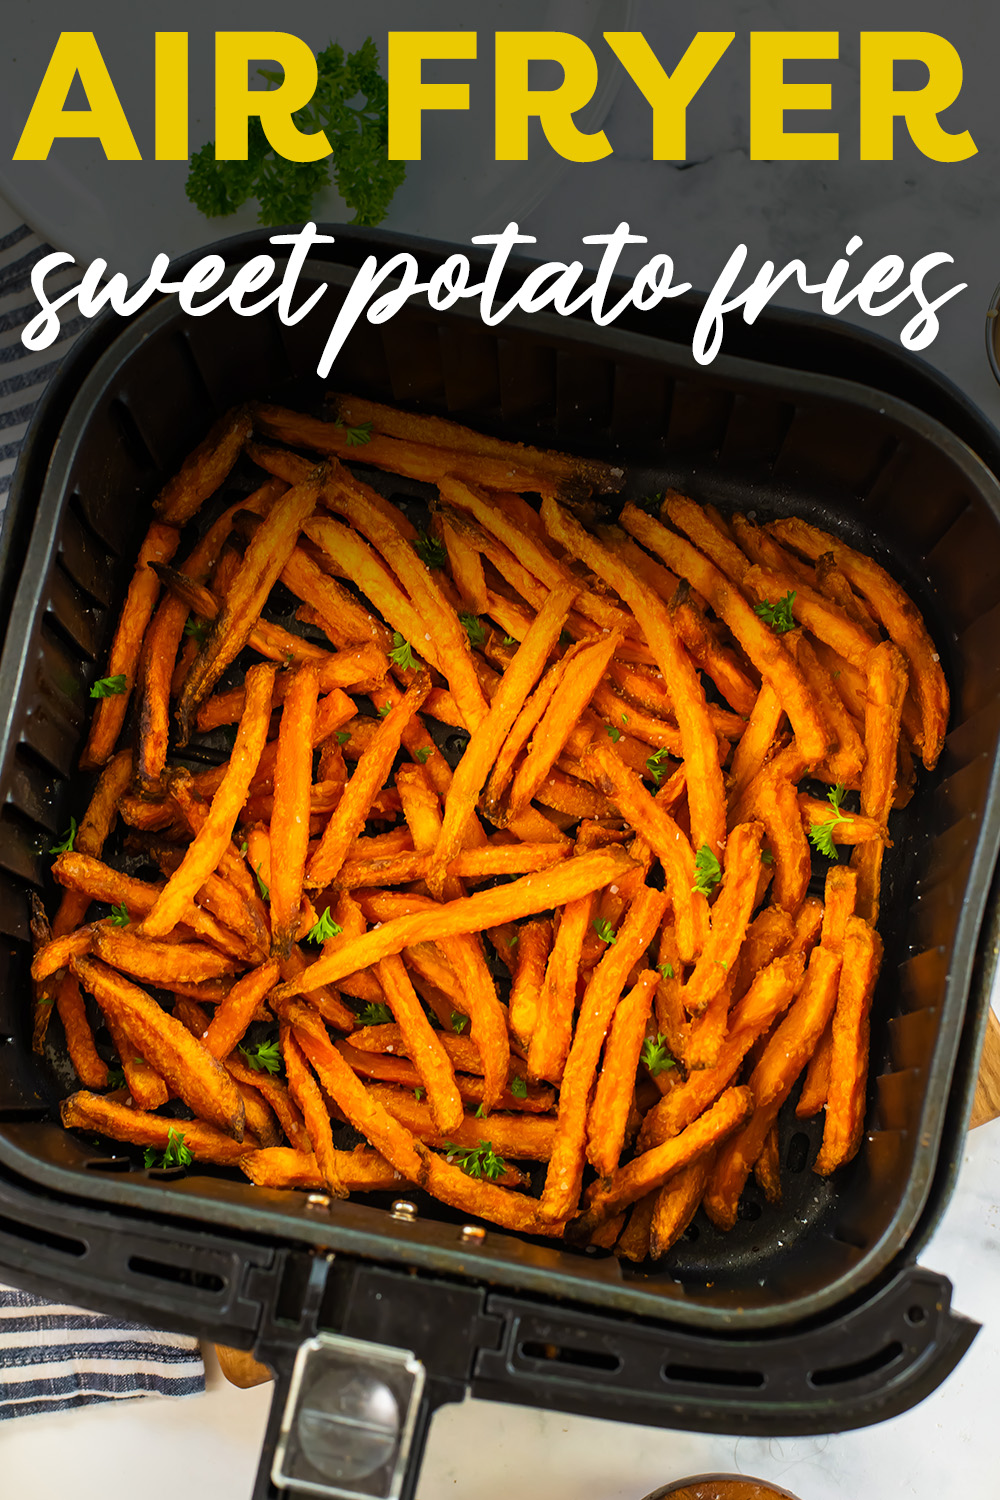 We took frozen sweet potato fries and cooked them to a crispy perfection in our air fryer with this recipe!